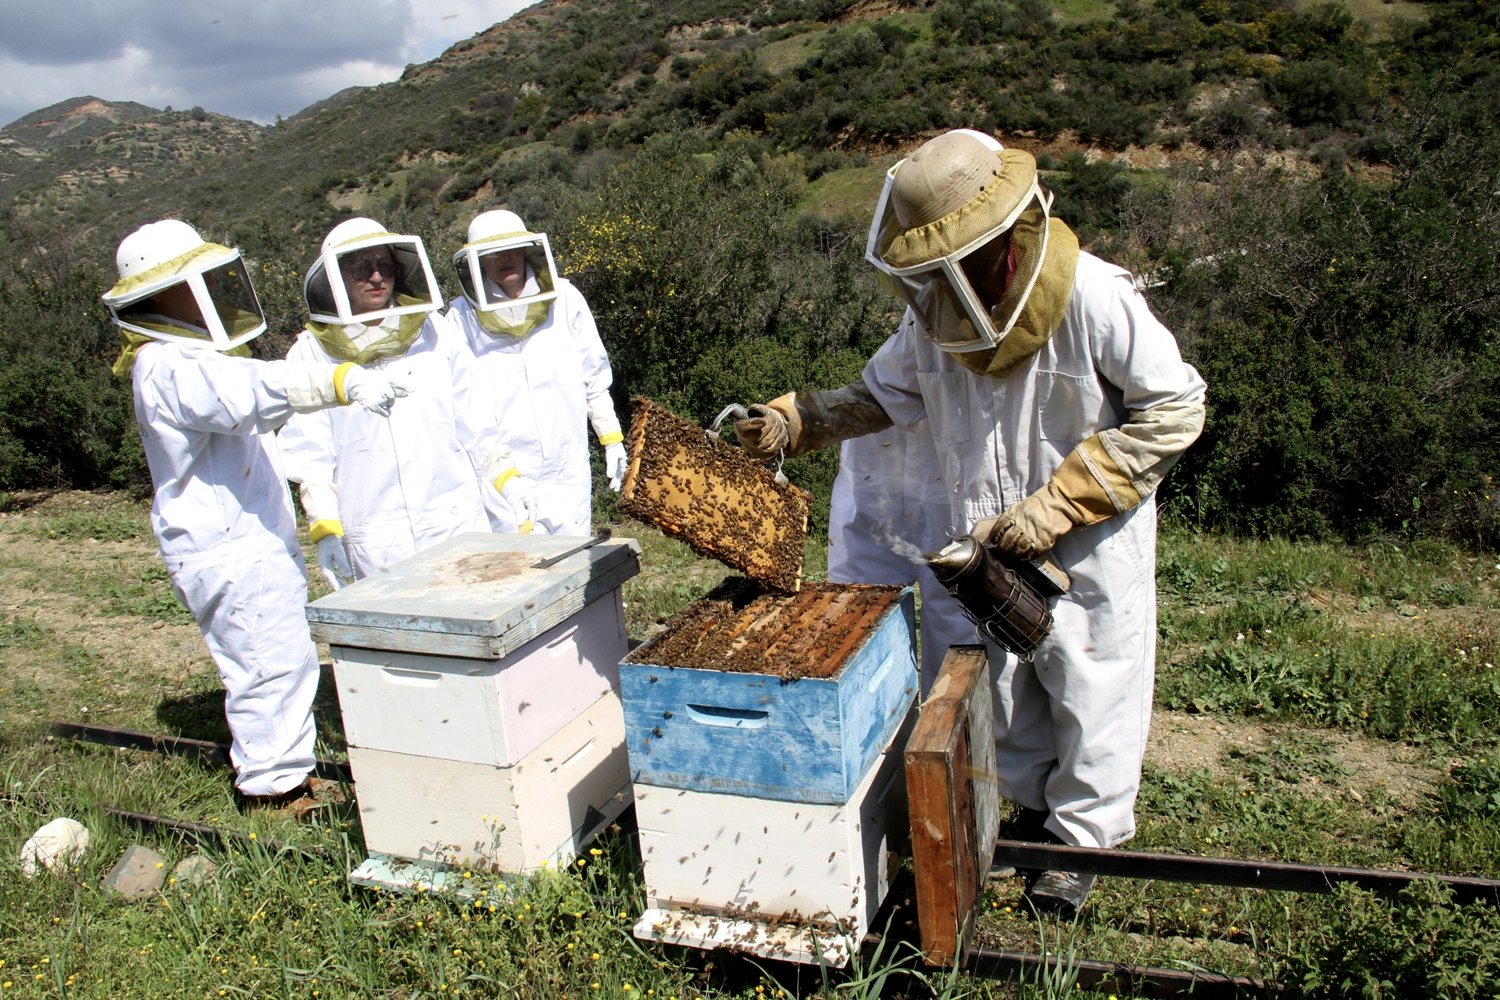 Larnaca’s bee villages seek to attract more visitors